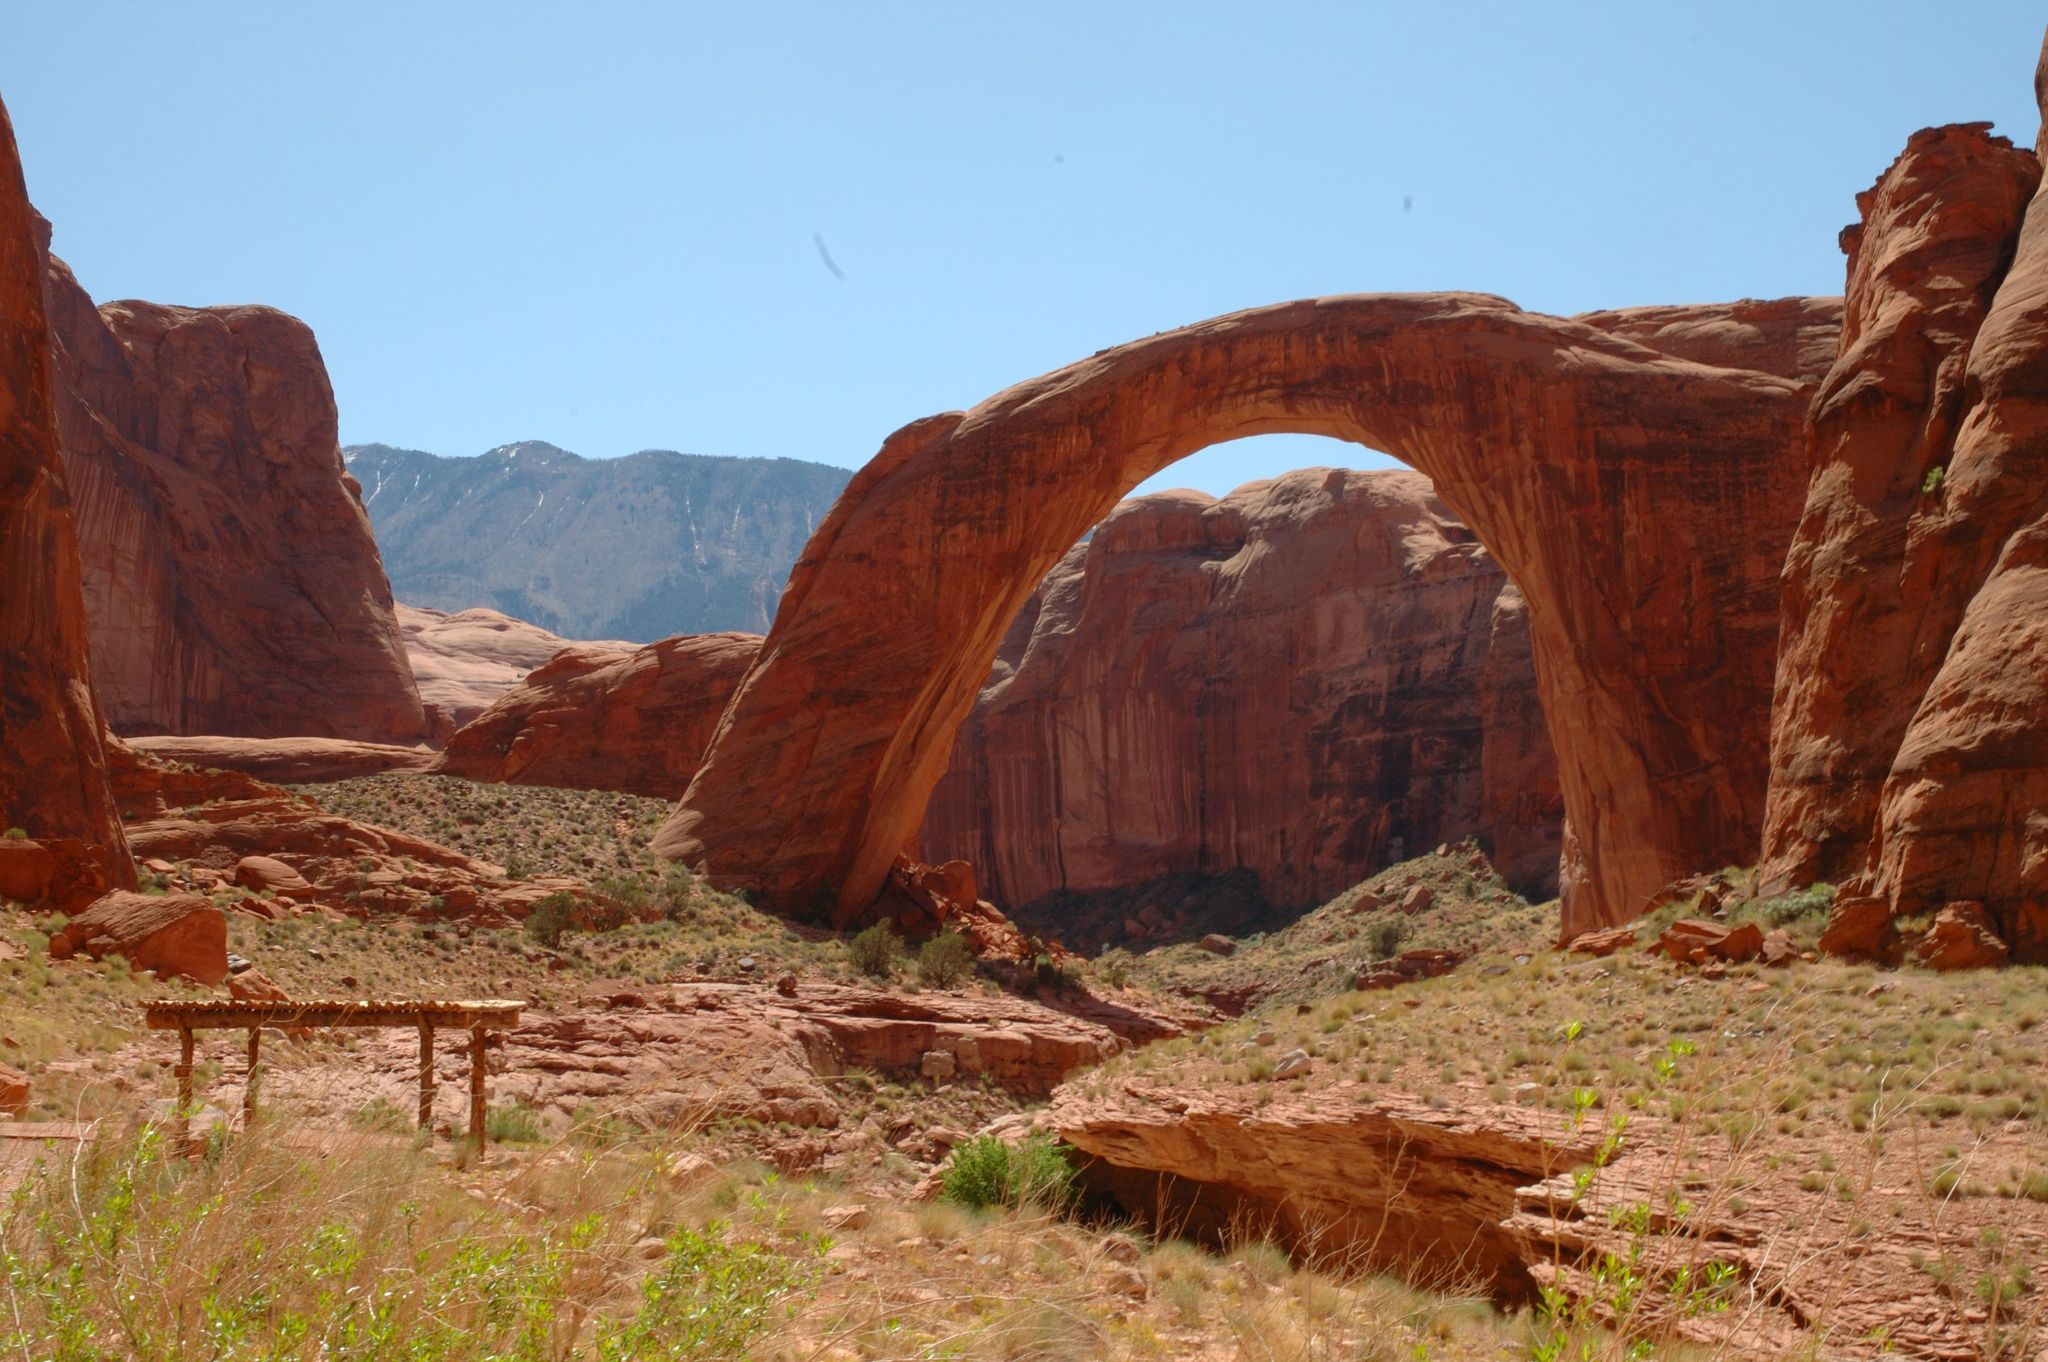 Stand here and take in the majesty of Rainbow Bridge - the largest natural bridge in the National Park Service.